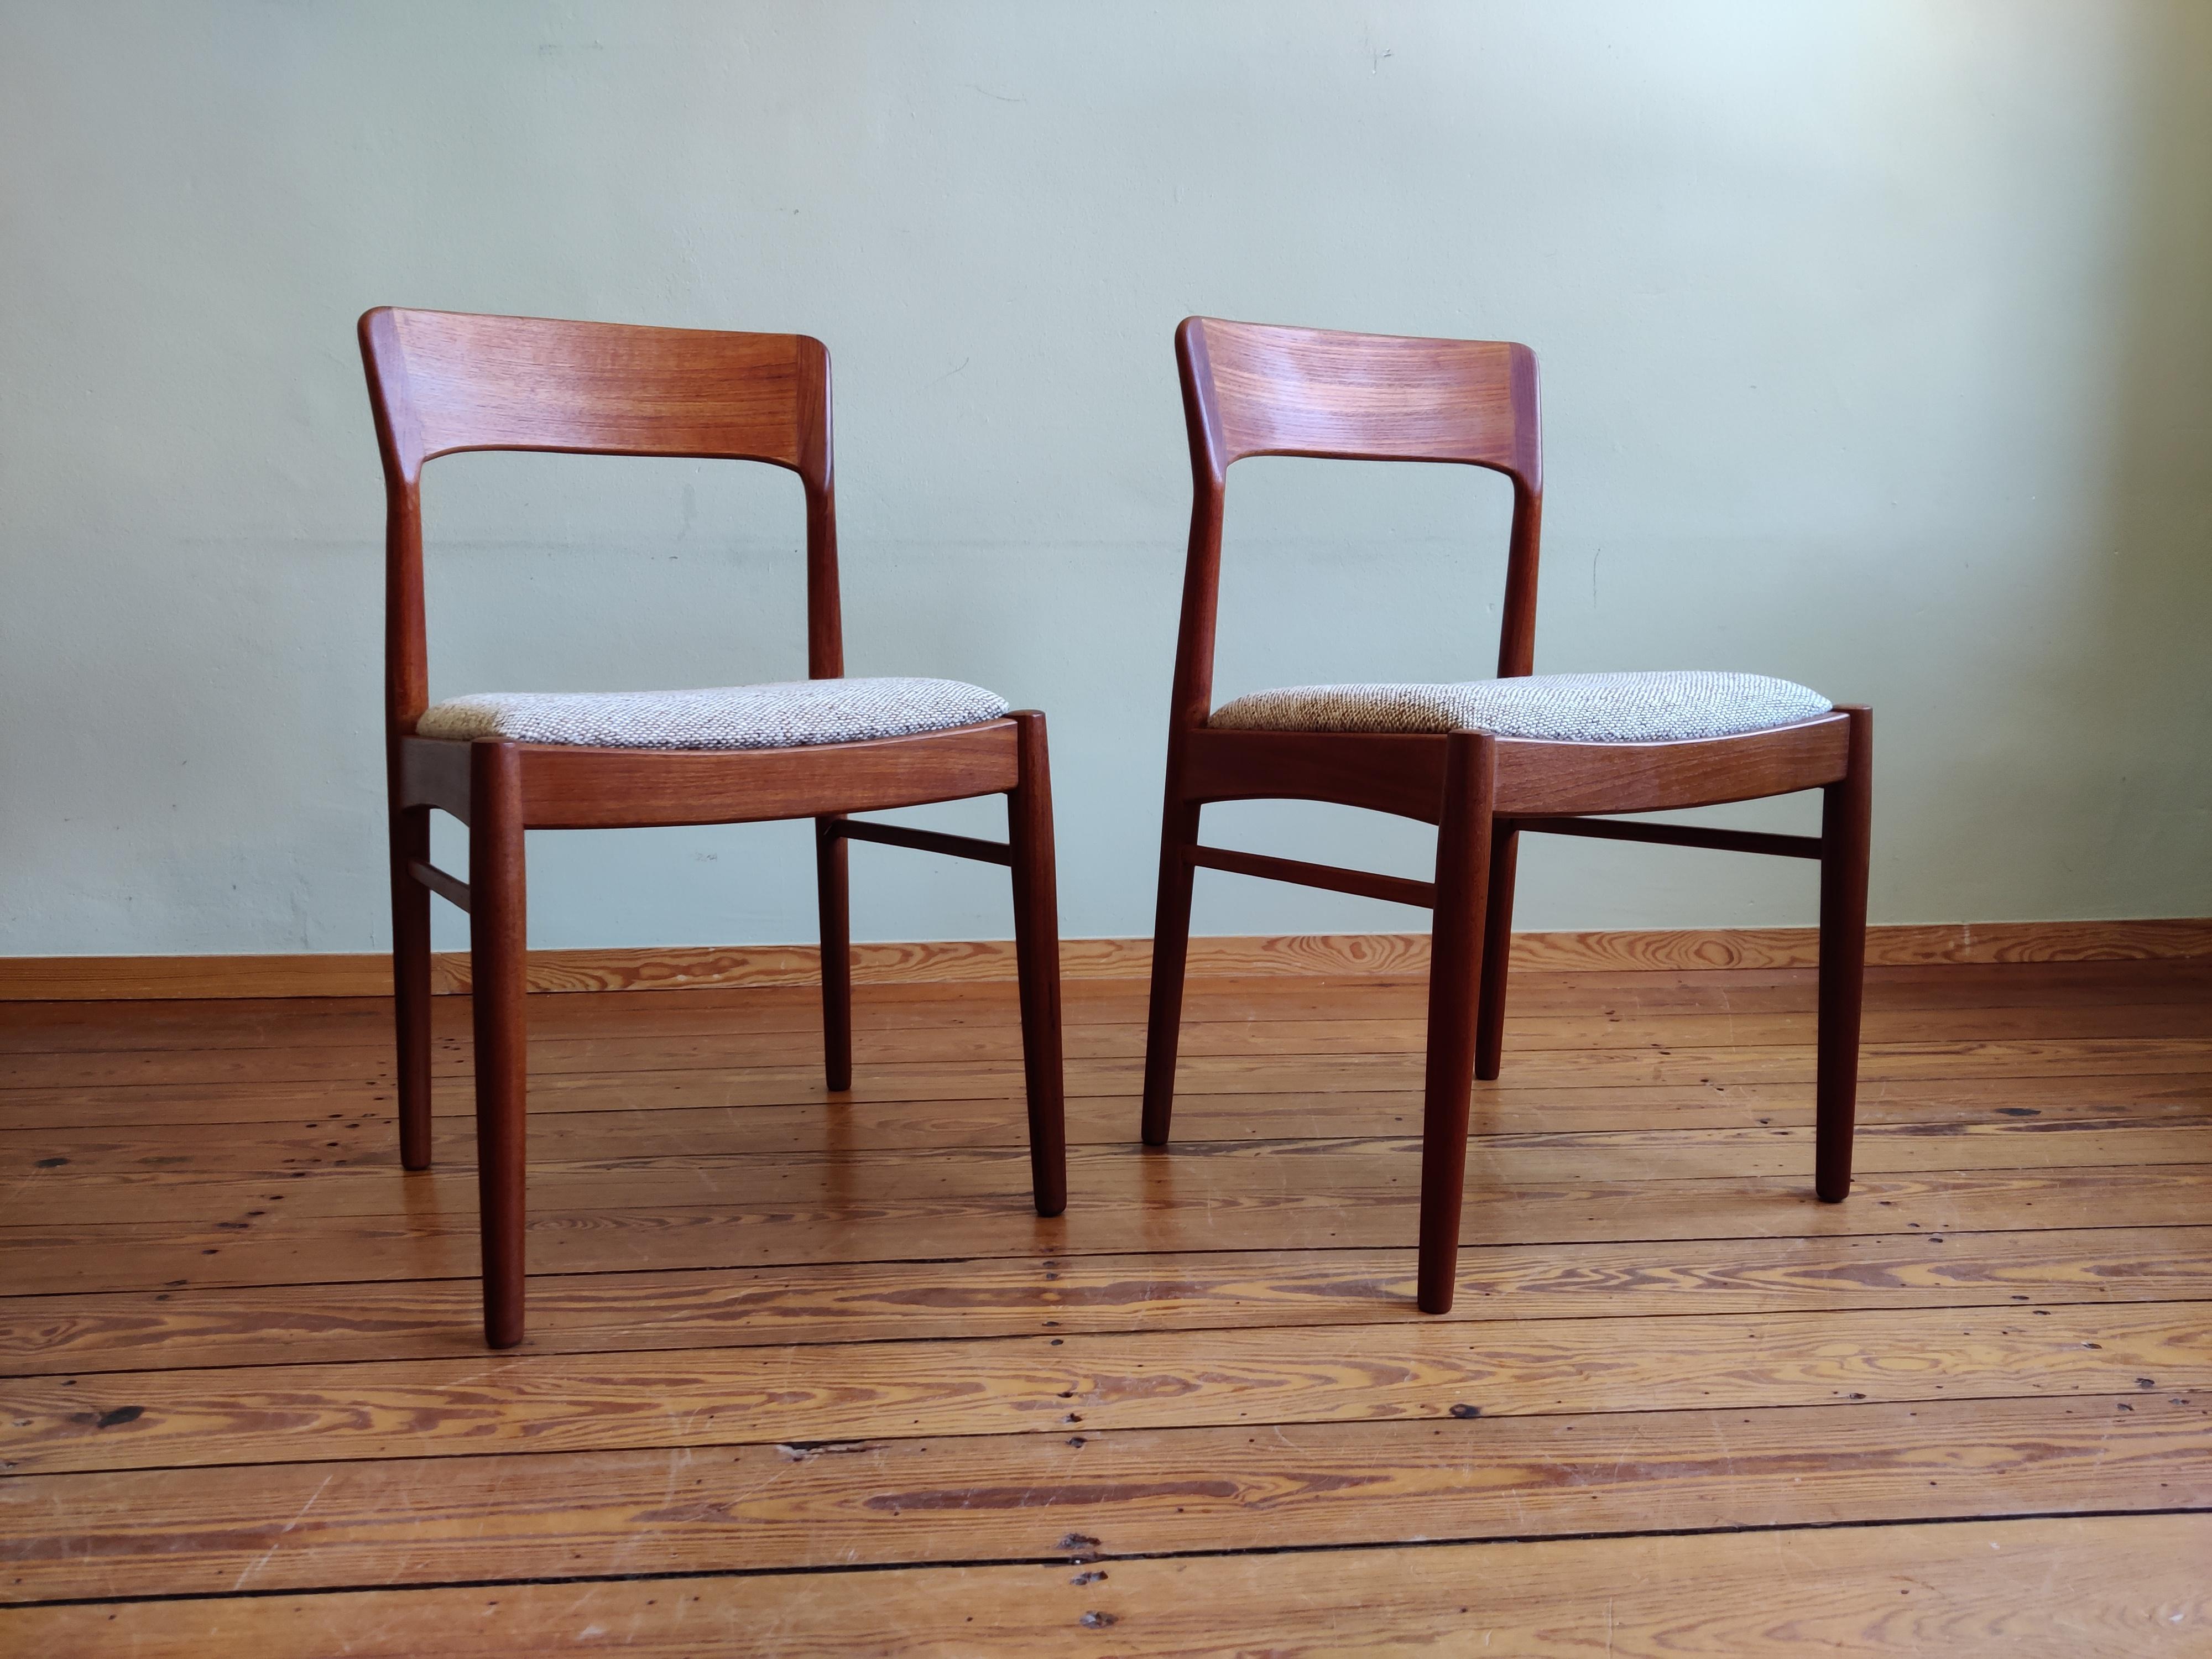 Set of 4 Diningchiars by H. Kjearnulf from the 1960s. 

Very nice condition, almost no signs of use visable. The Teak wood shows no mentionable traces of use,  the textile looks and feels great, all chairs are rocksolid.

The chairs would be